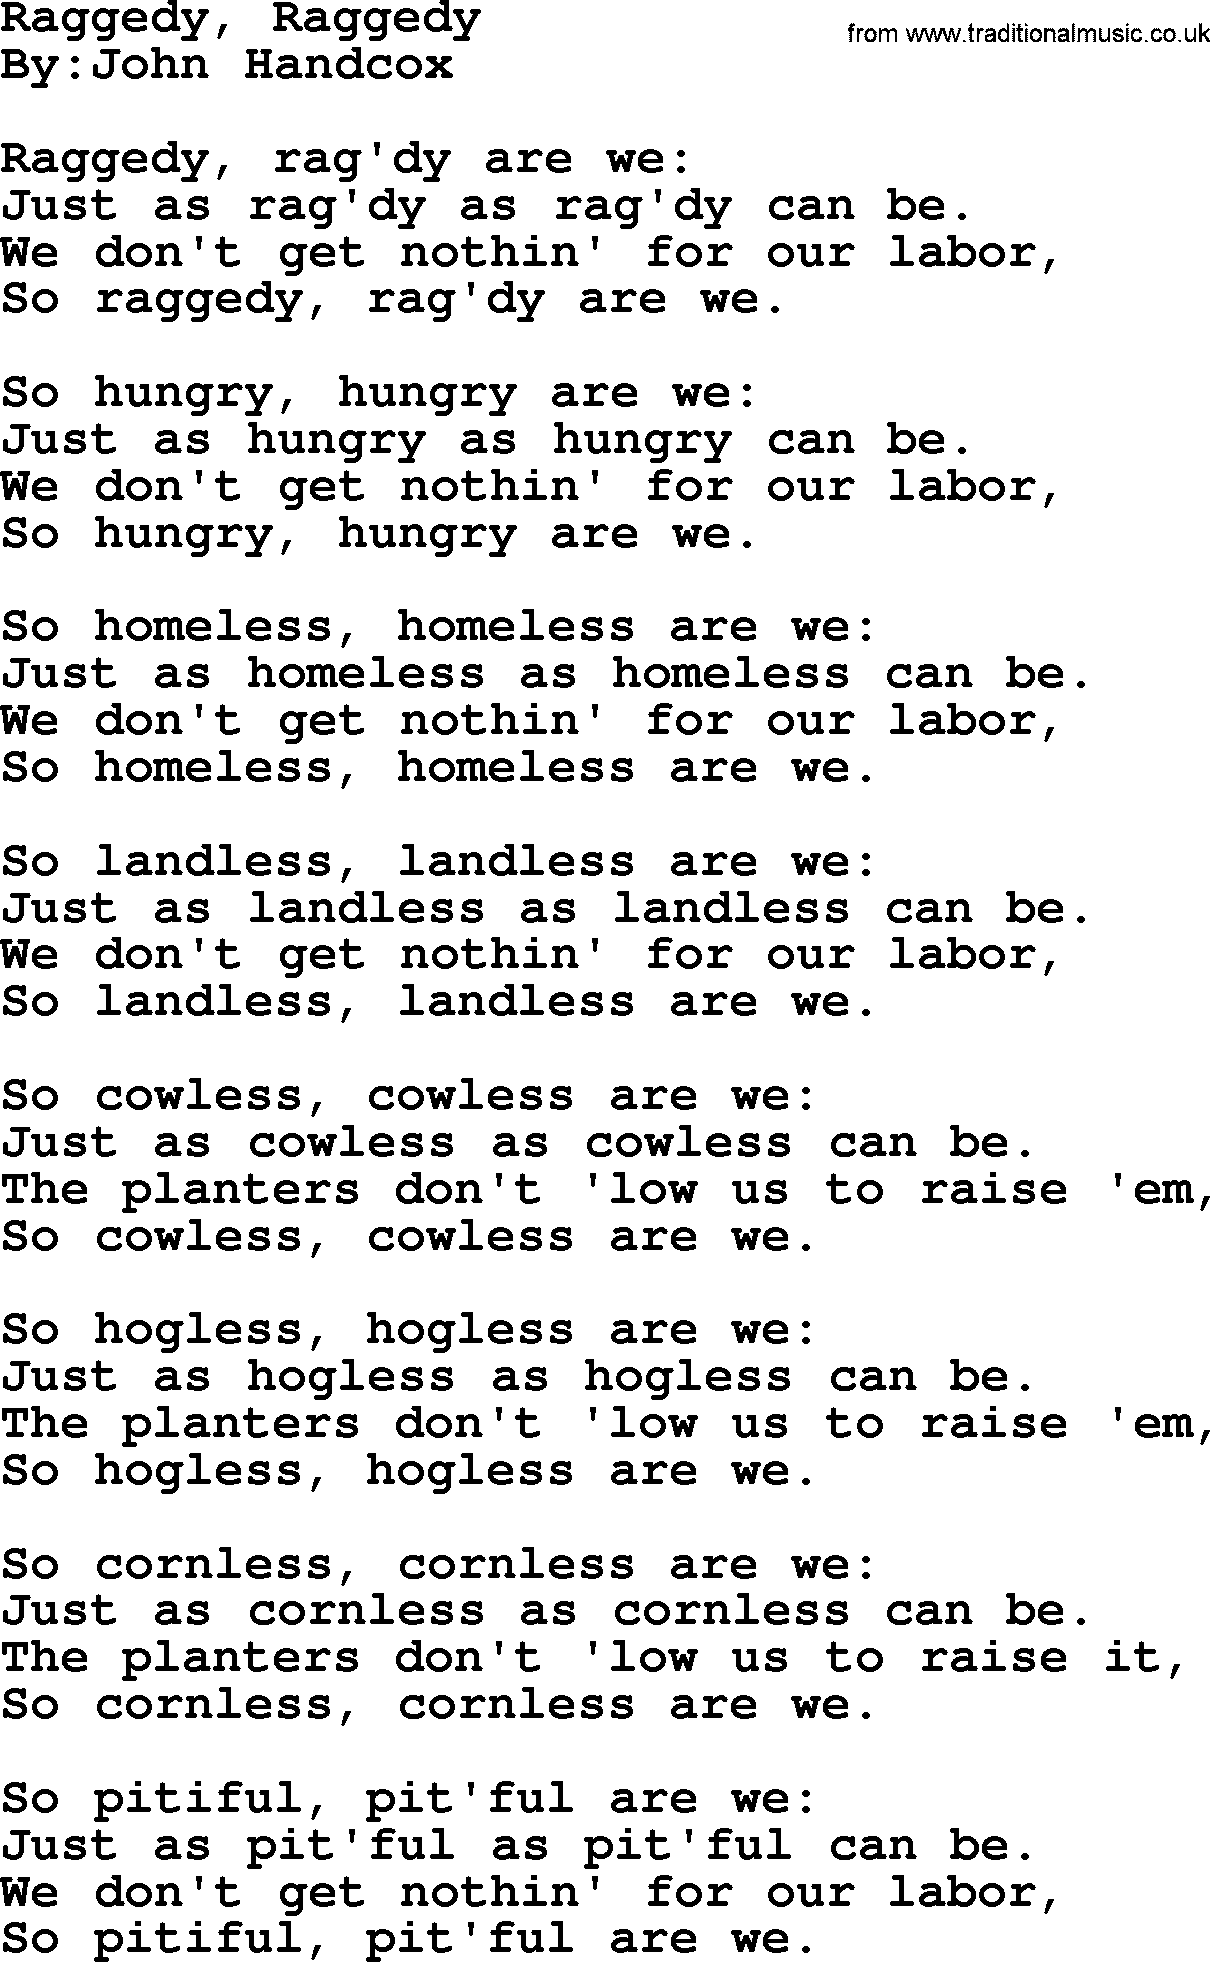 Political, Solidarity, Workers or Union song: Raggedy Raggedy, lyrics